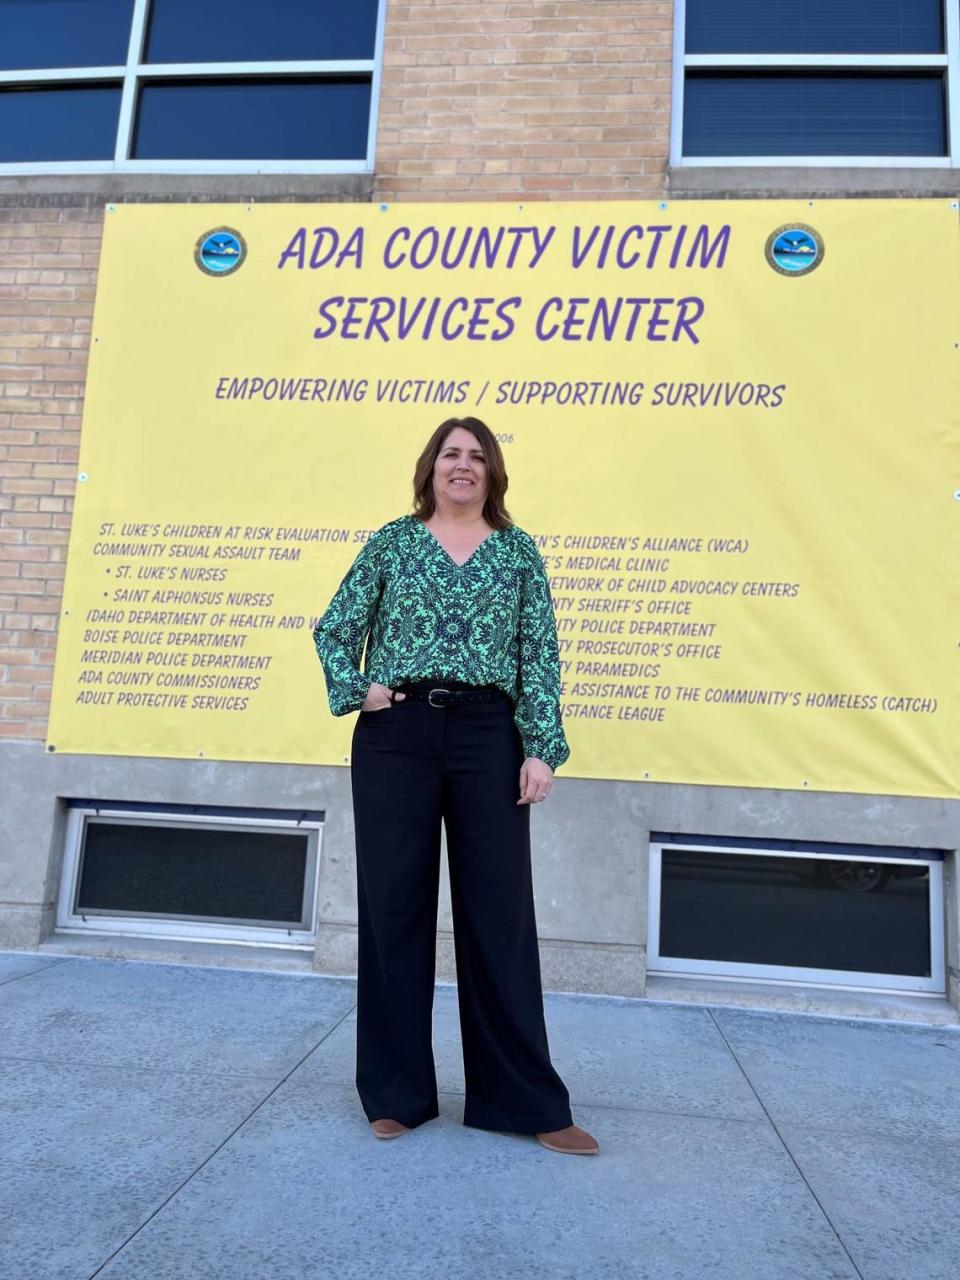 Trina Allen, the new executive director of the Ada County Victims Services Center, started her journey helping victims of crimes as a dispatcher for Payette County. She worked there while she raised her children as a single mother.